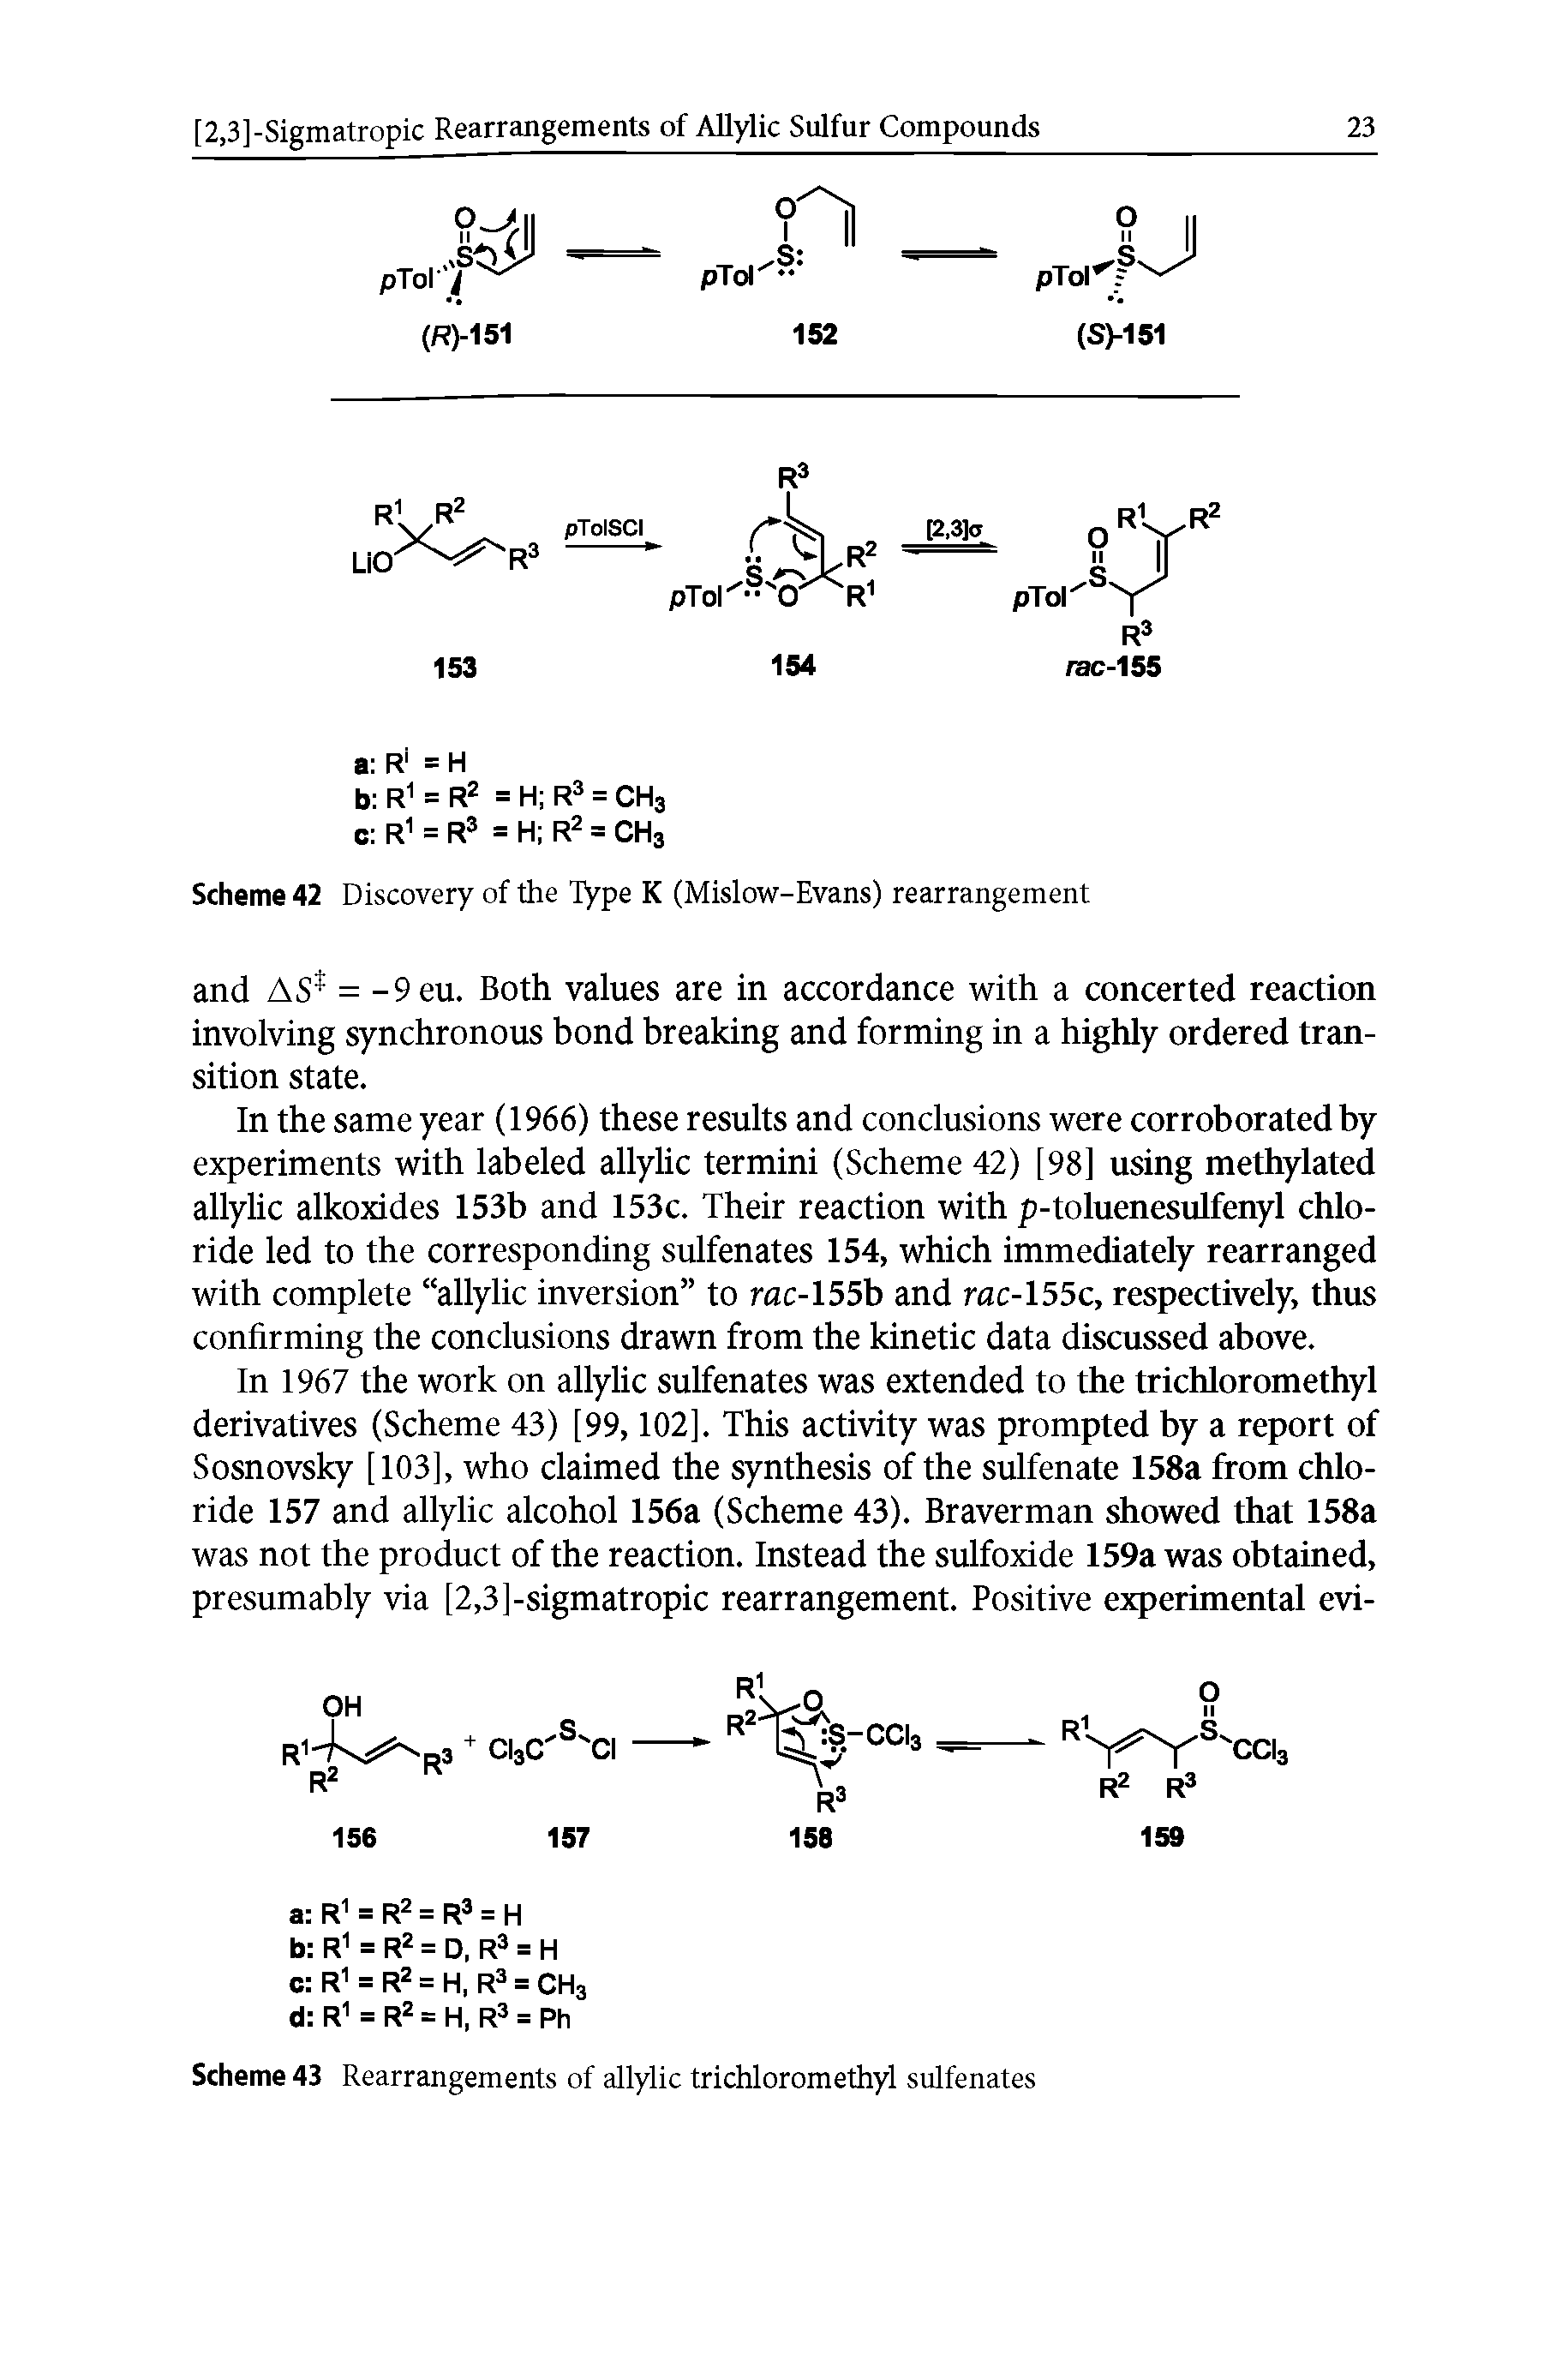 Scheme 42 Discovery of the Type K (Mislow-Evans) rearrangement...